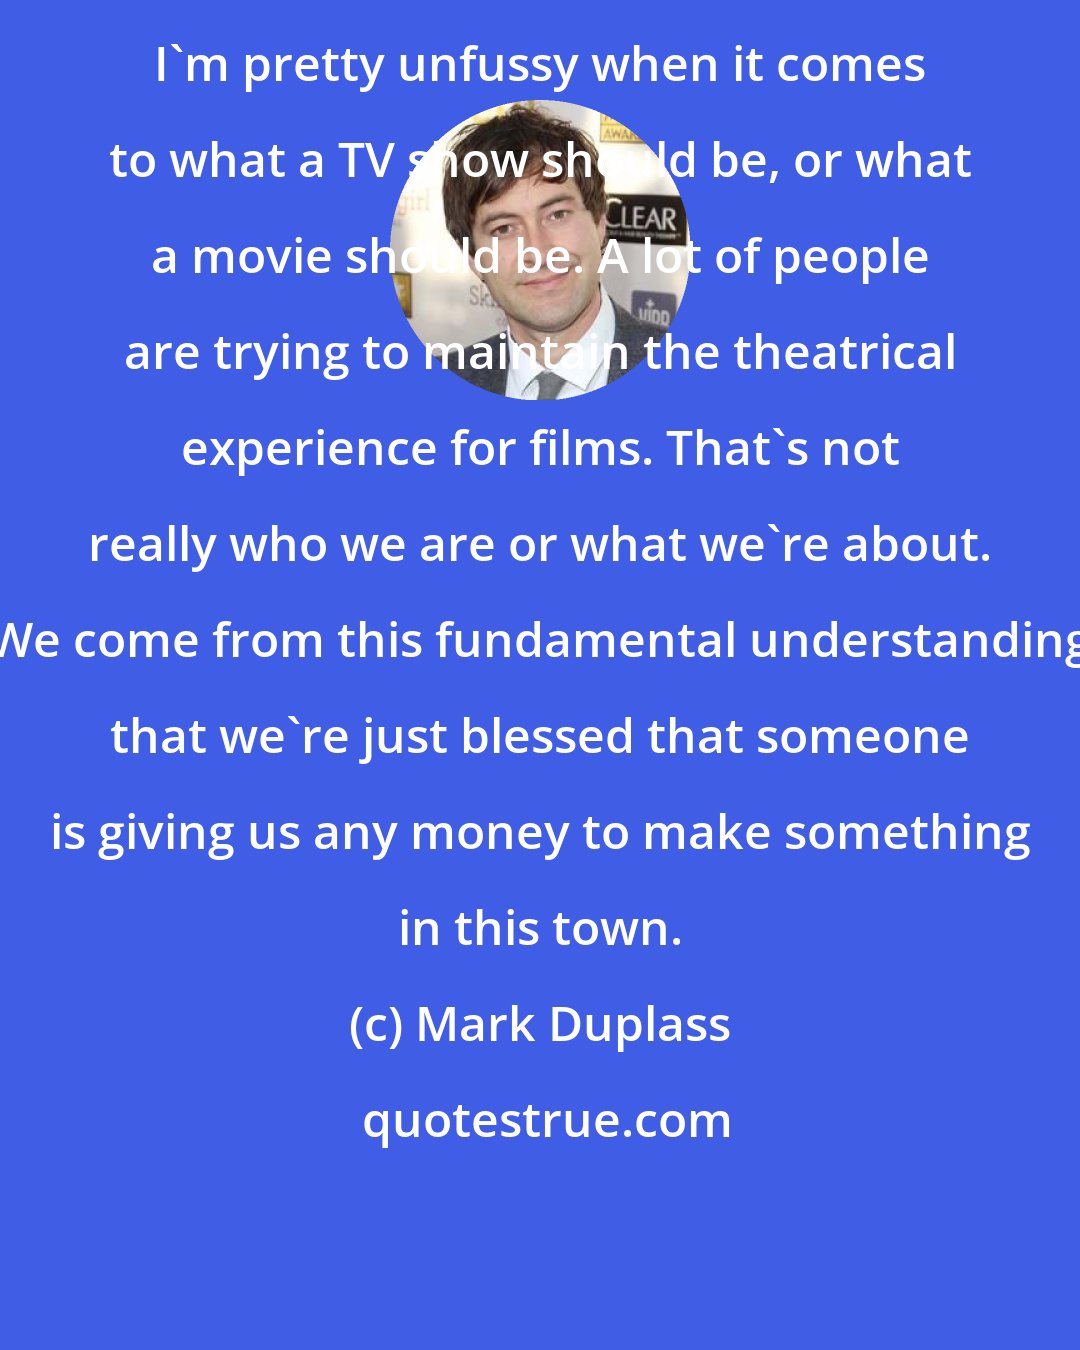 Mark Duplass: I'm pretty unfussy when it comes to what a TV show should be, or what a movie should be. A lot of people are trying to maintain the theatrical experience for films. That's not really who we are or what we're about. We come from this fundamental understanding that we're just blessed that someone is giving us any money to make something in this town.